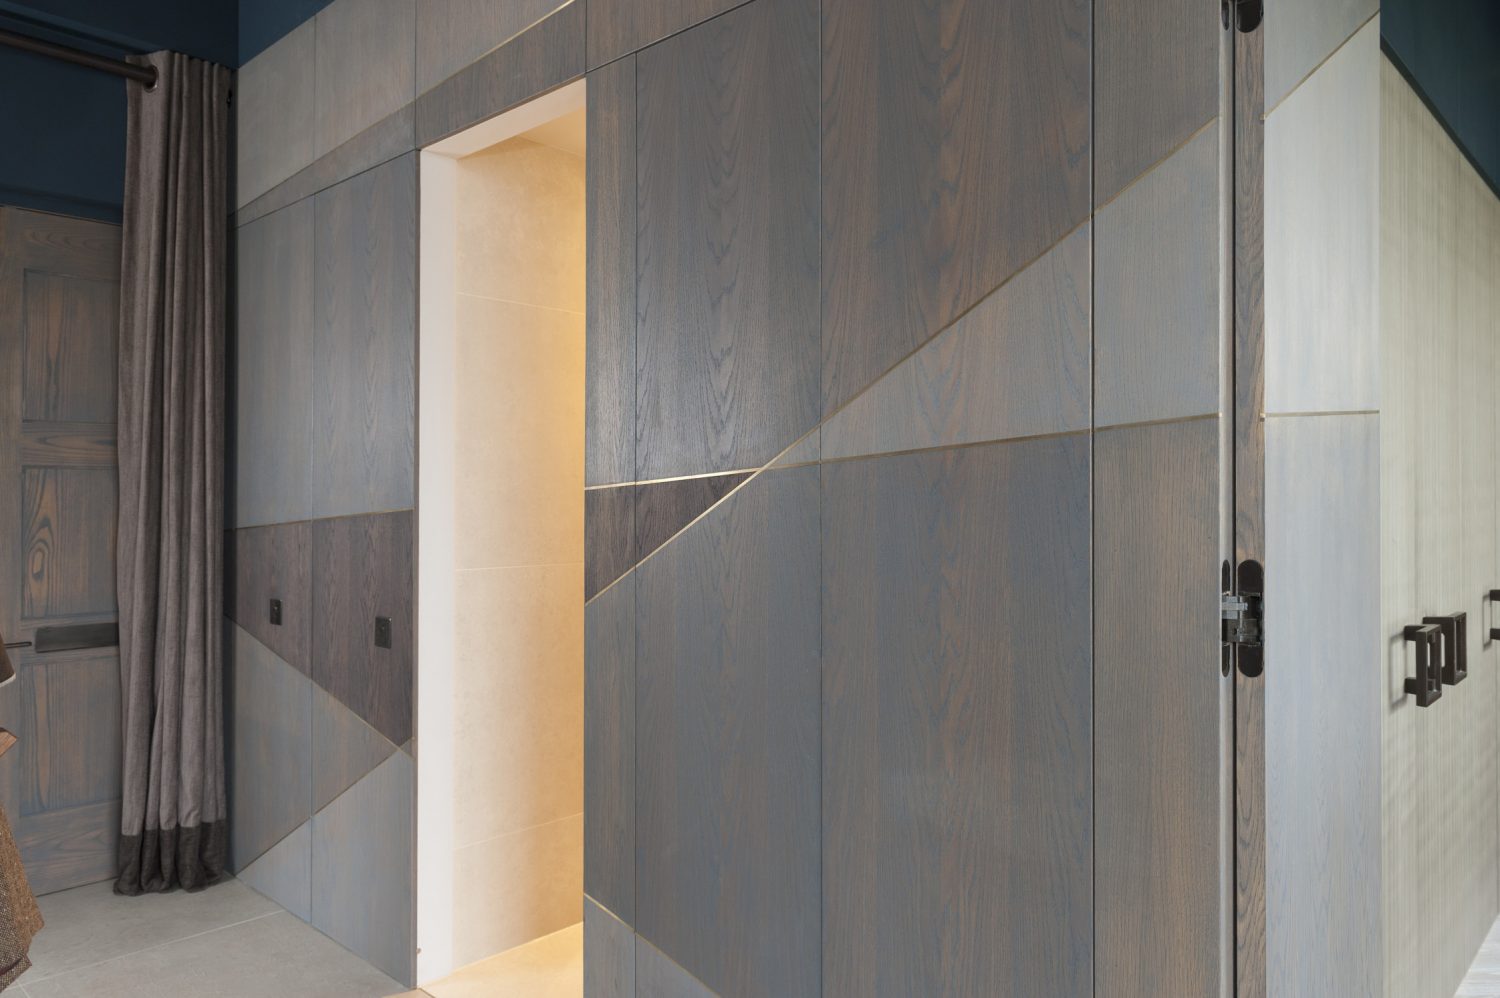 The attention to detail throughout the apartment is sublime – in a wall of beautiful geometric wood panelling, it is almost impossible to tell where the doors to the bedrooms and storage area are